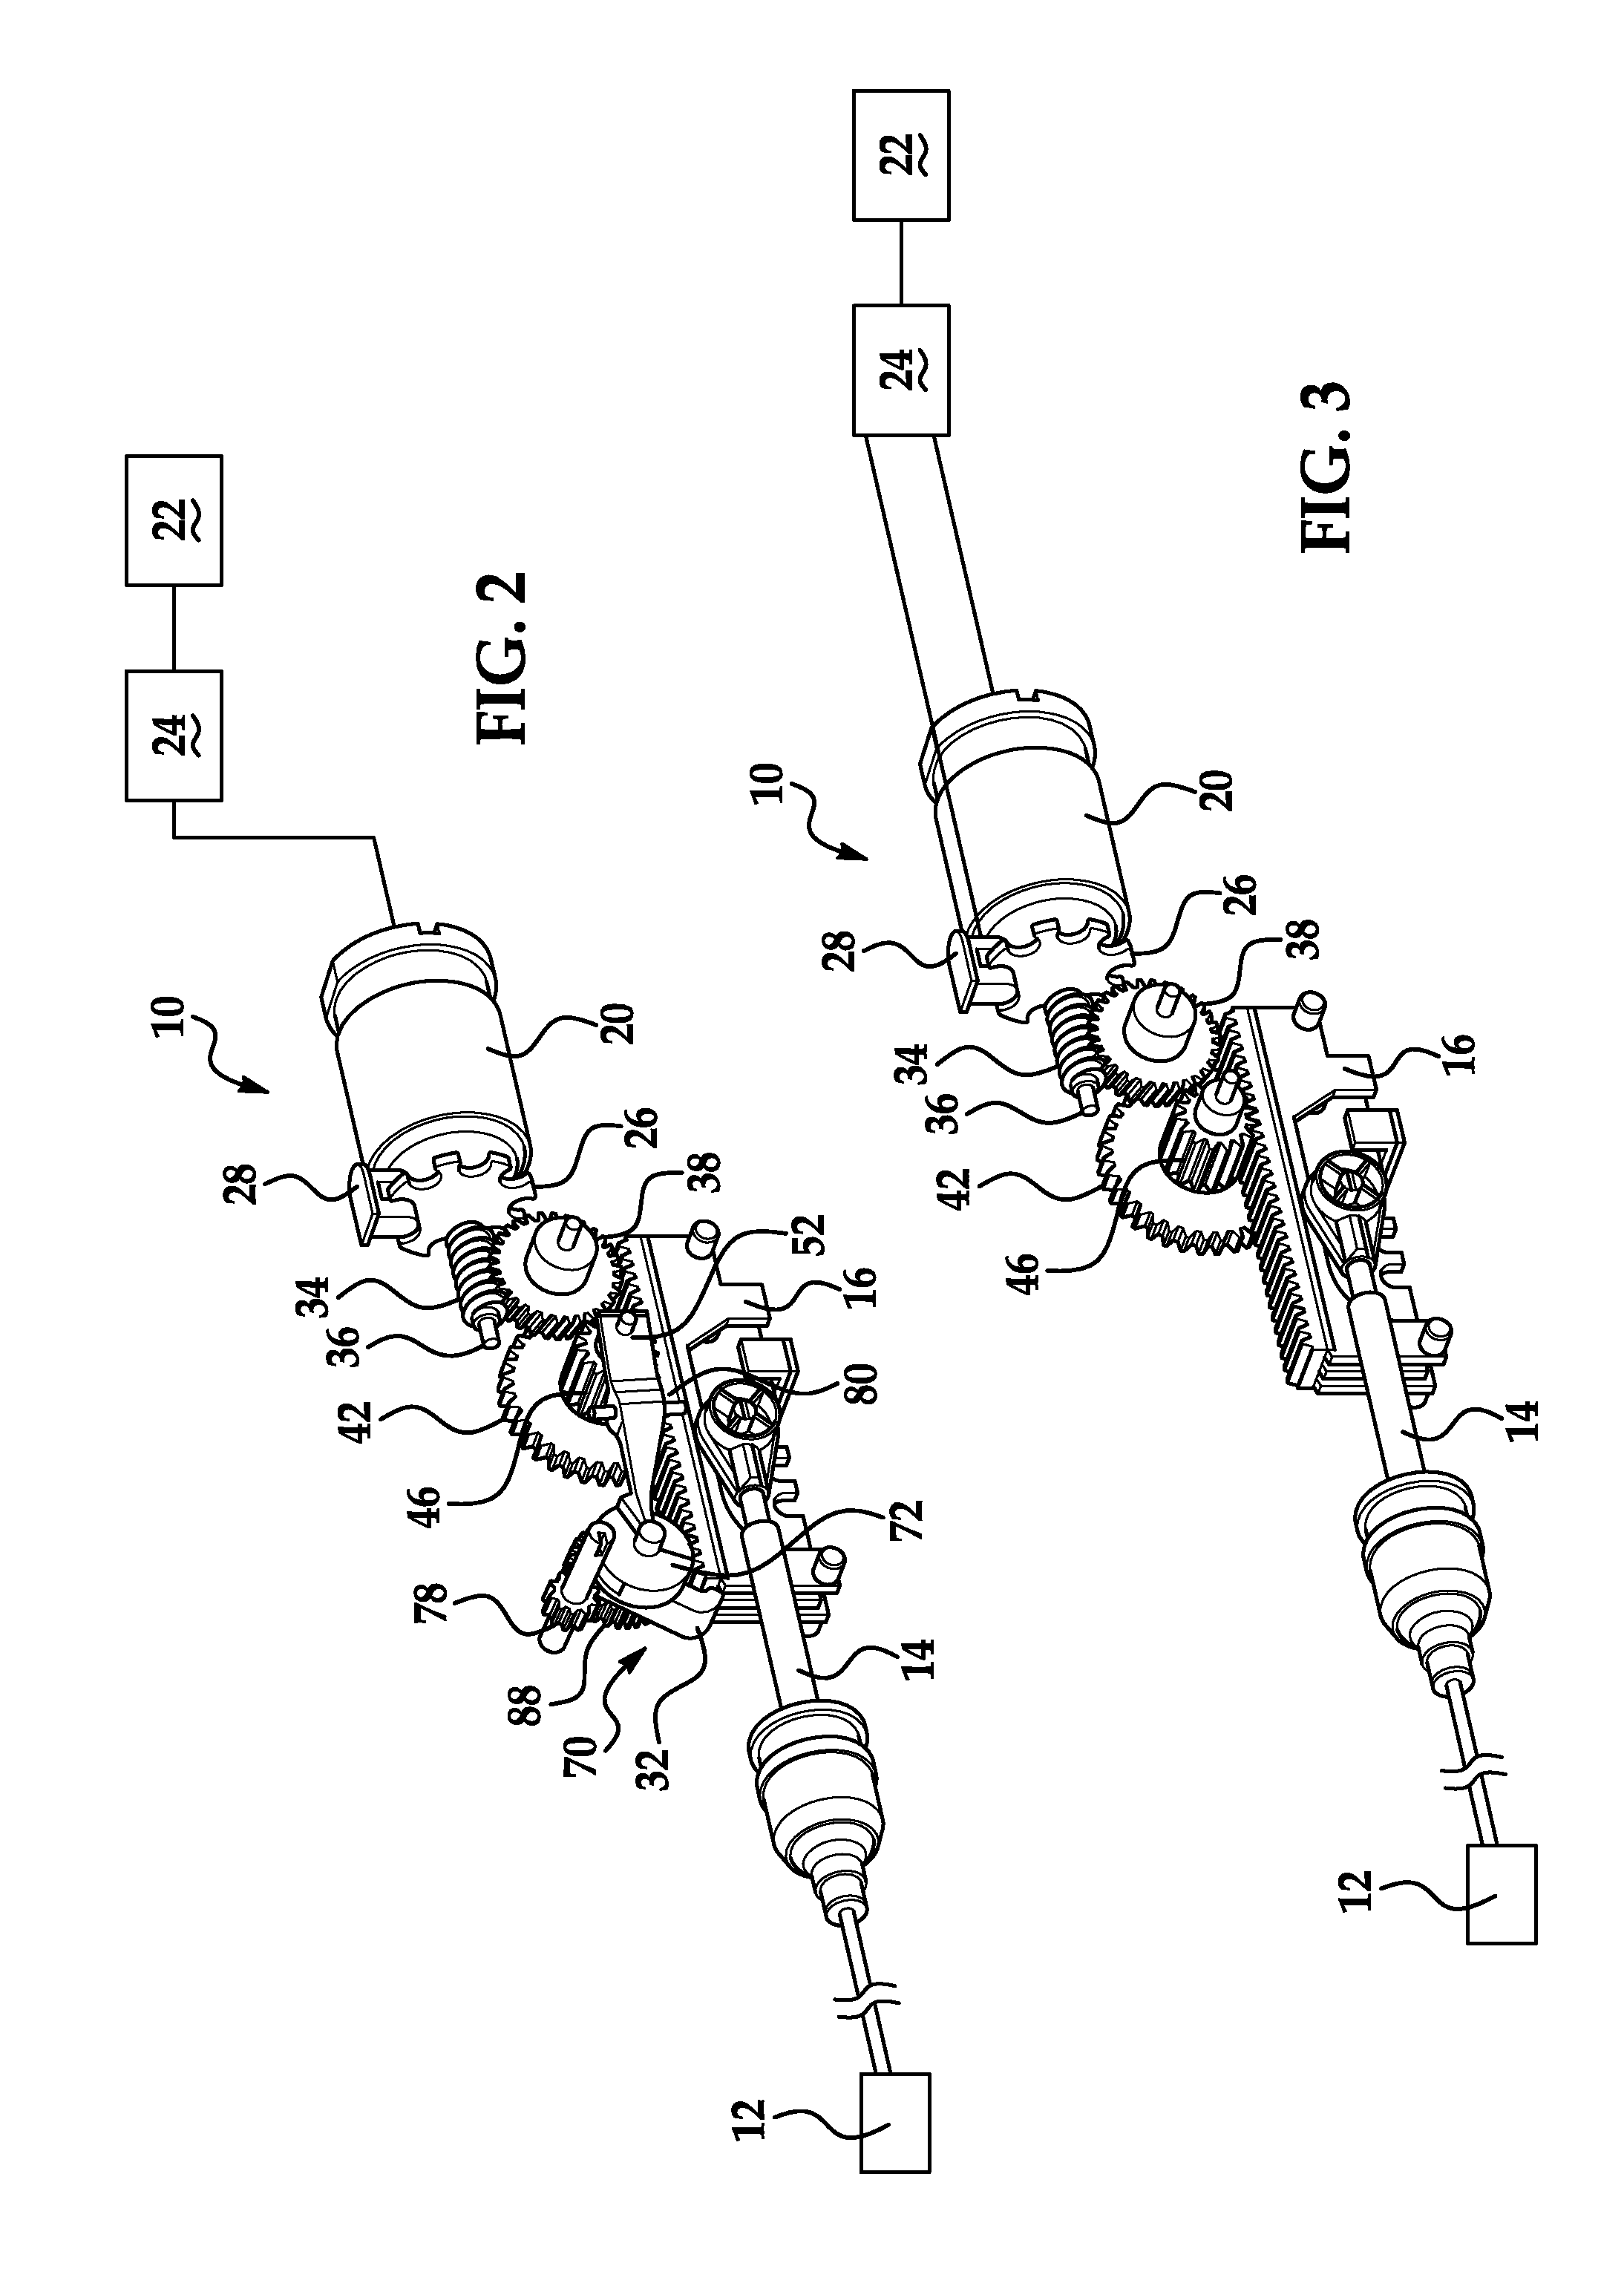 Apparatus and method for providing a manual override to shift by wire actuator